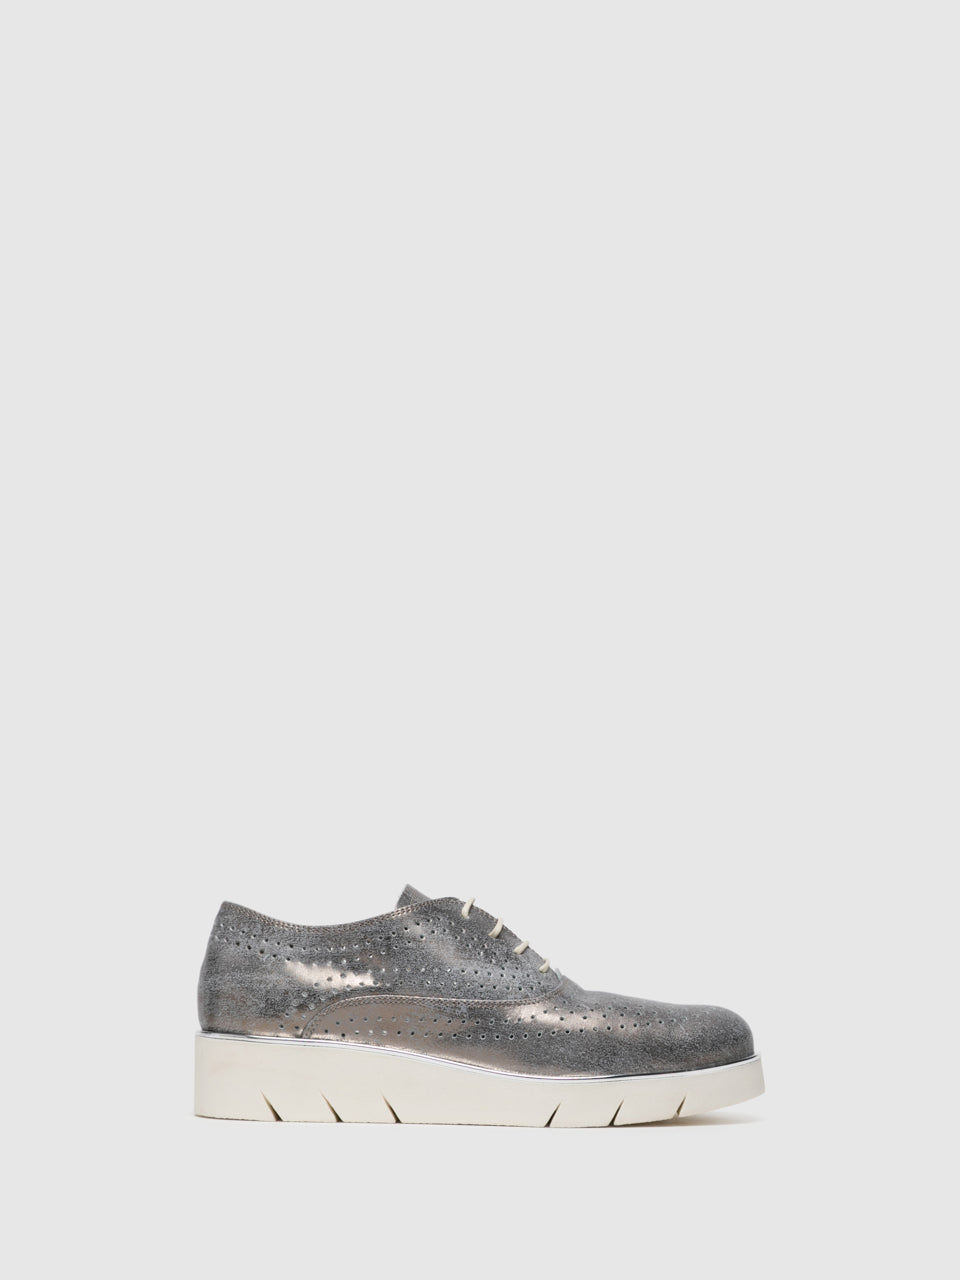 The Flexx Silver Lace-up Shoes